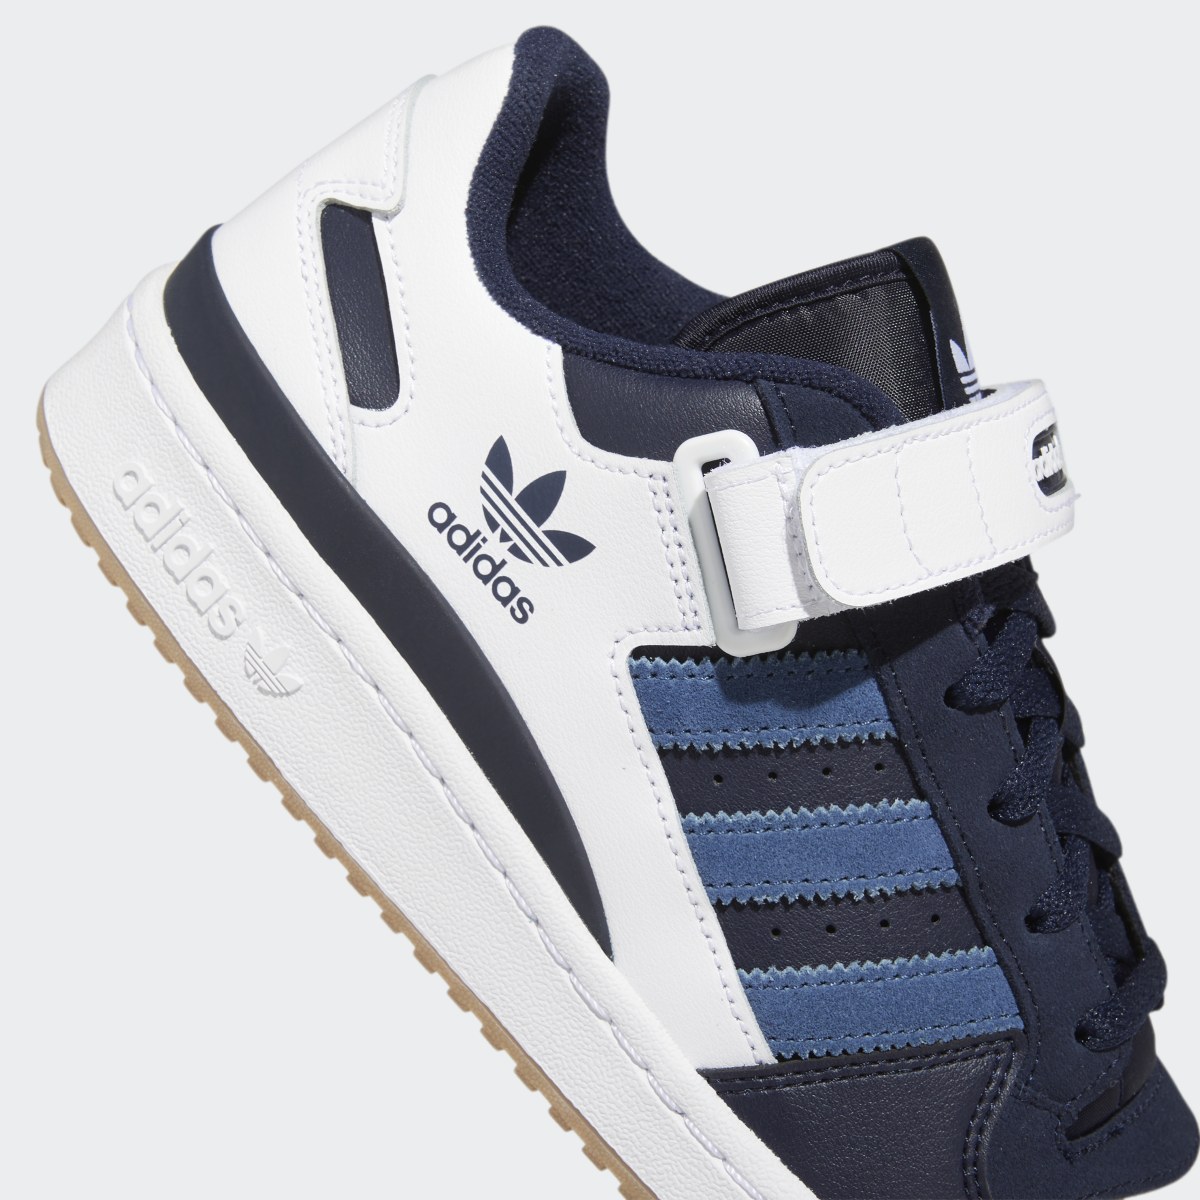 Adidas Forum Low Shoes. 12